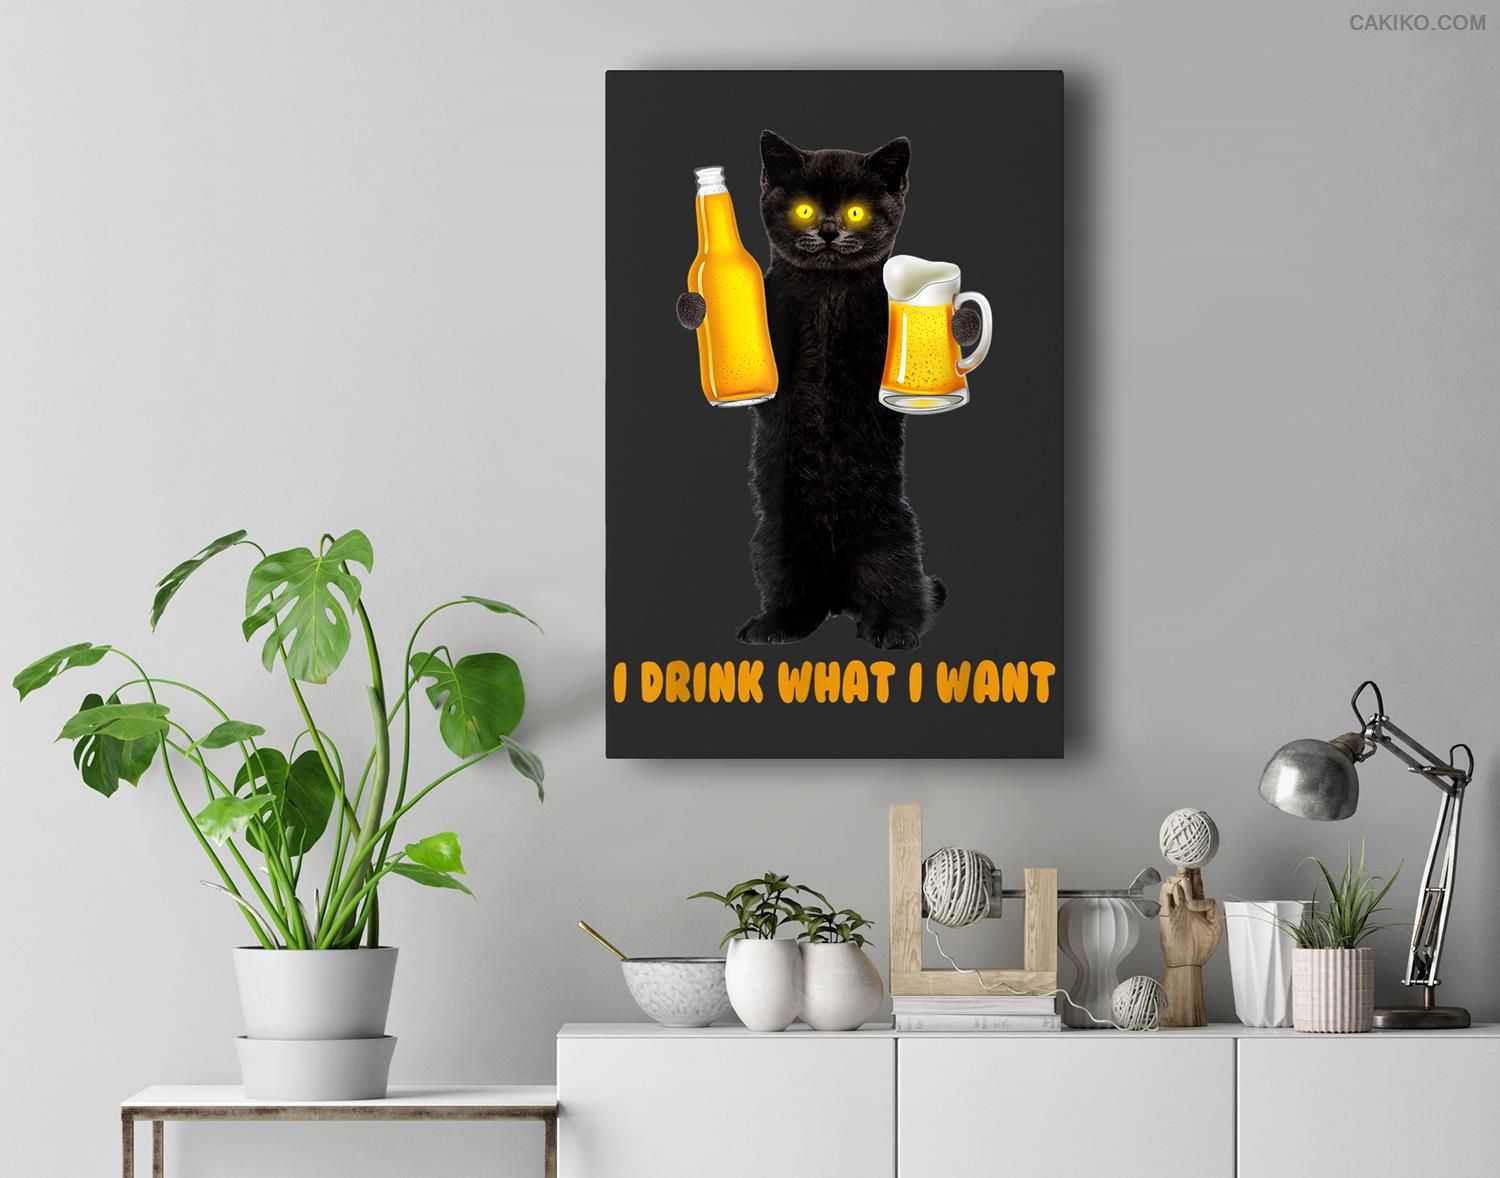 I Drink What I Want Funny Black Cat Holds Beer Drinking Team Premium Wall Art Canvas Decor